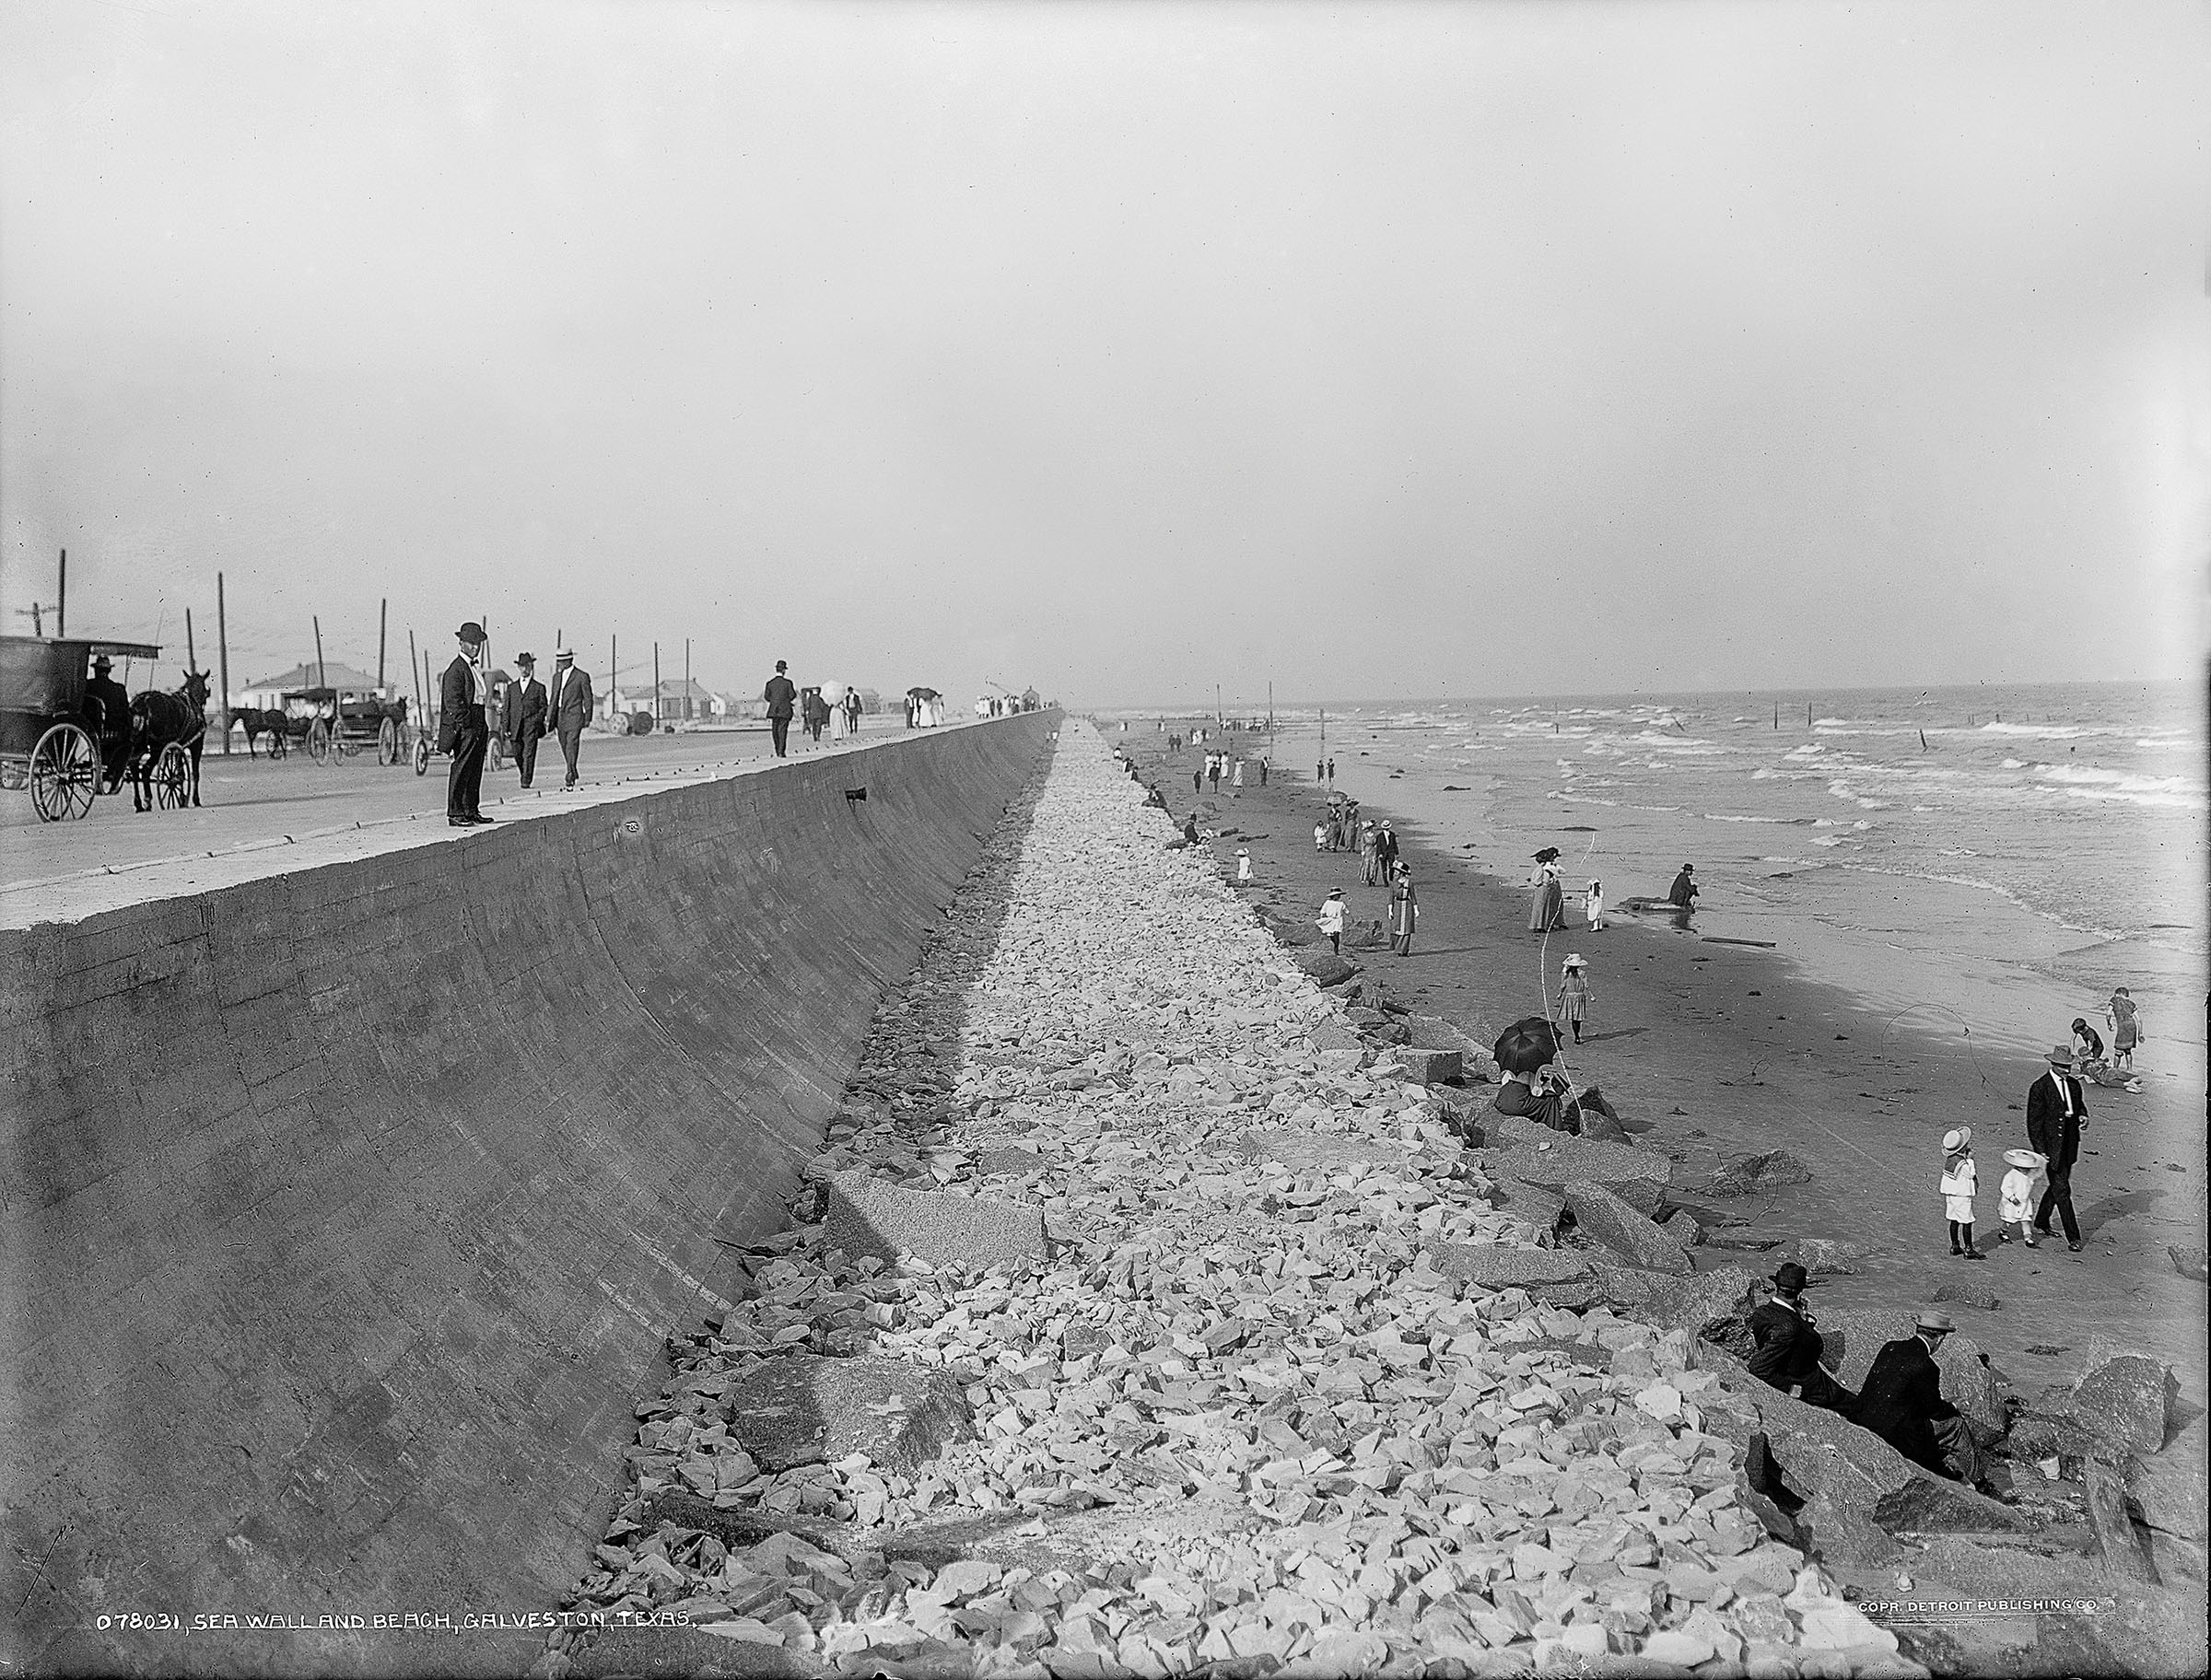 People walk along the road and shore on the Galveston Seawall after the hurricane